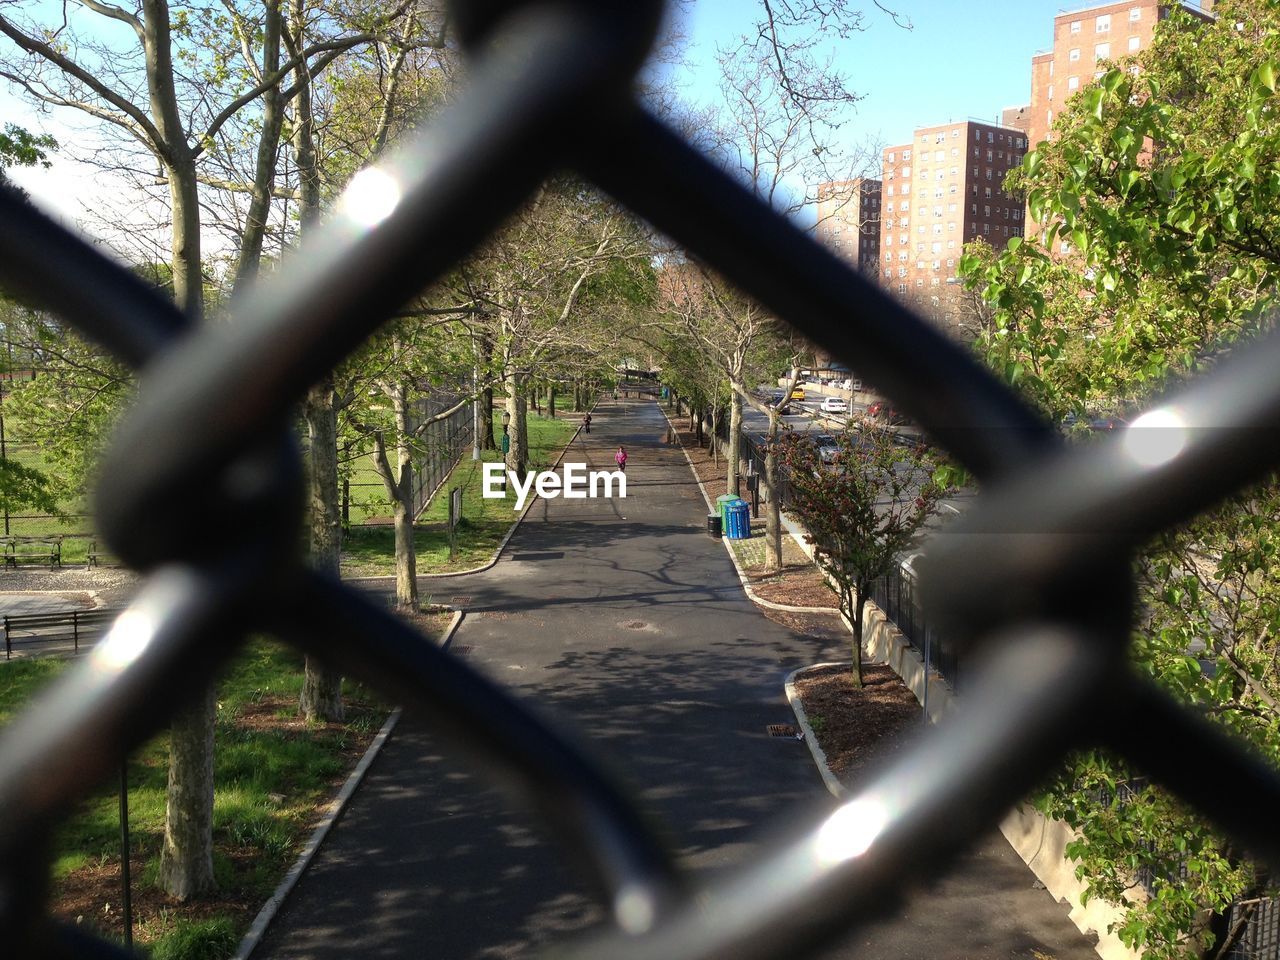 Road by buildings seen through chainlink fence